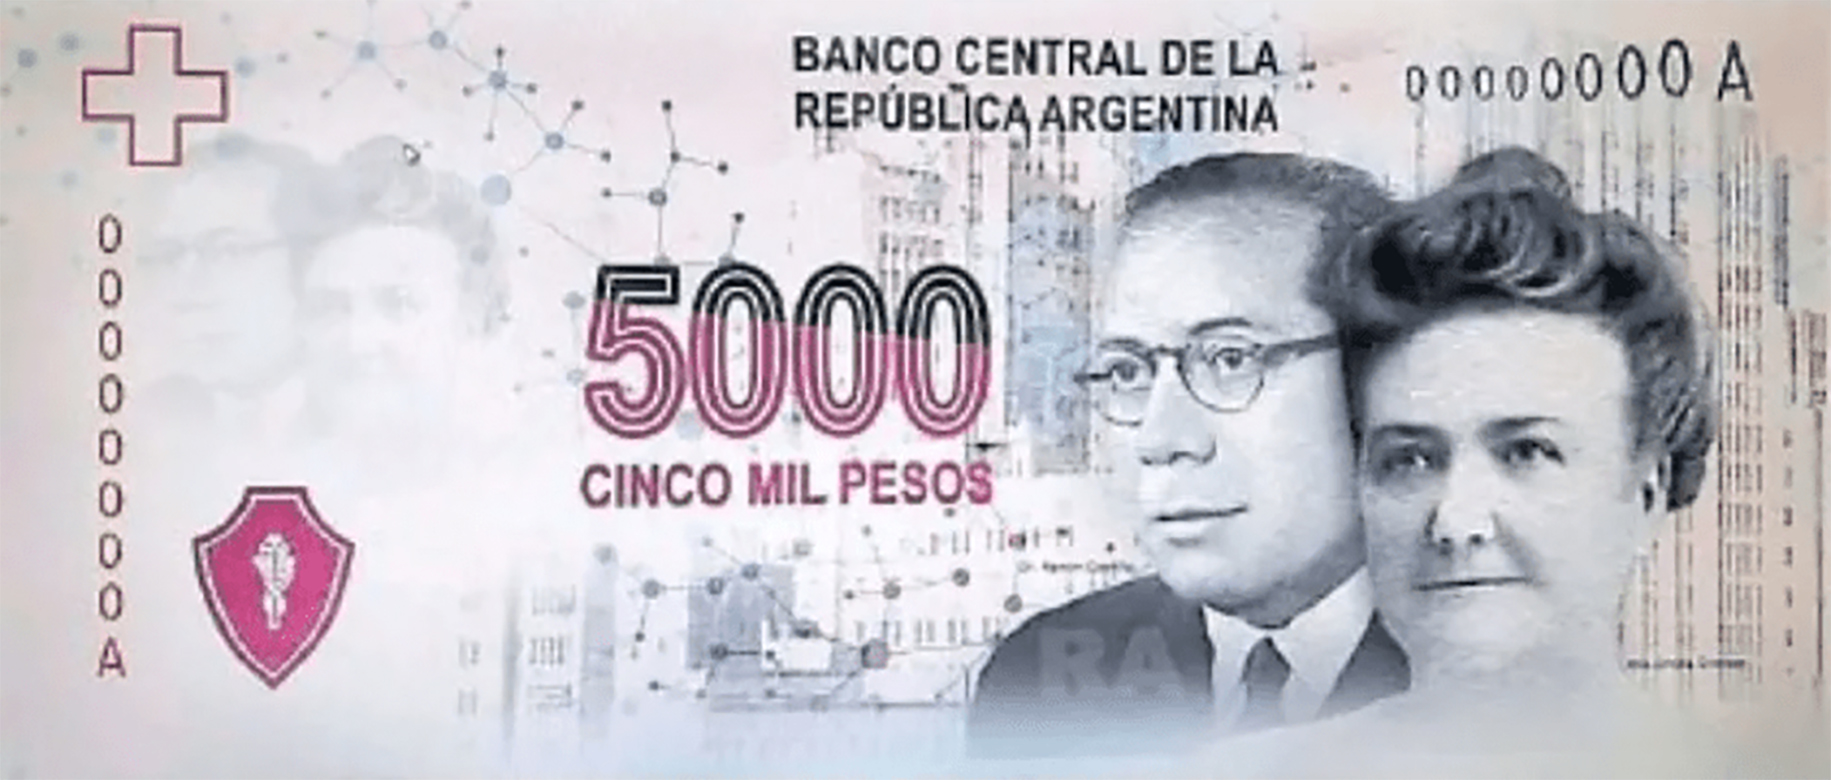 Argentina New 5 000 Peso Note Reported For Introduction In 2020 Banknotenews